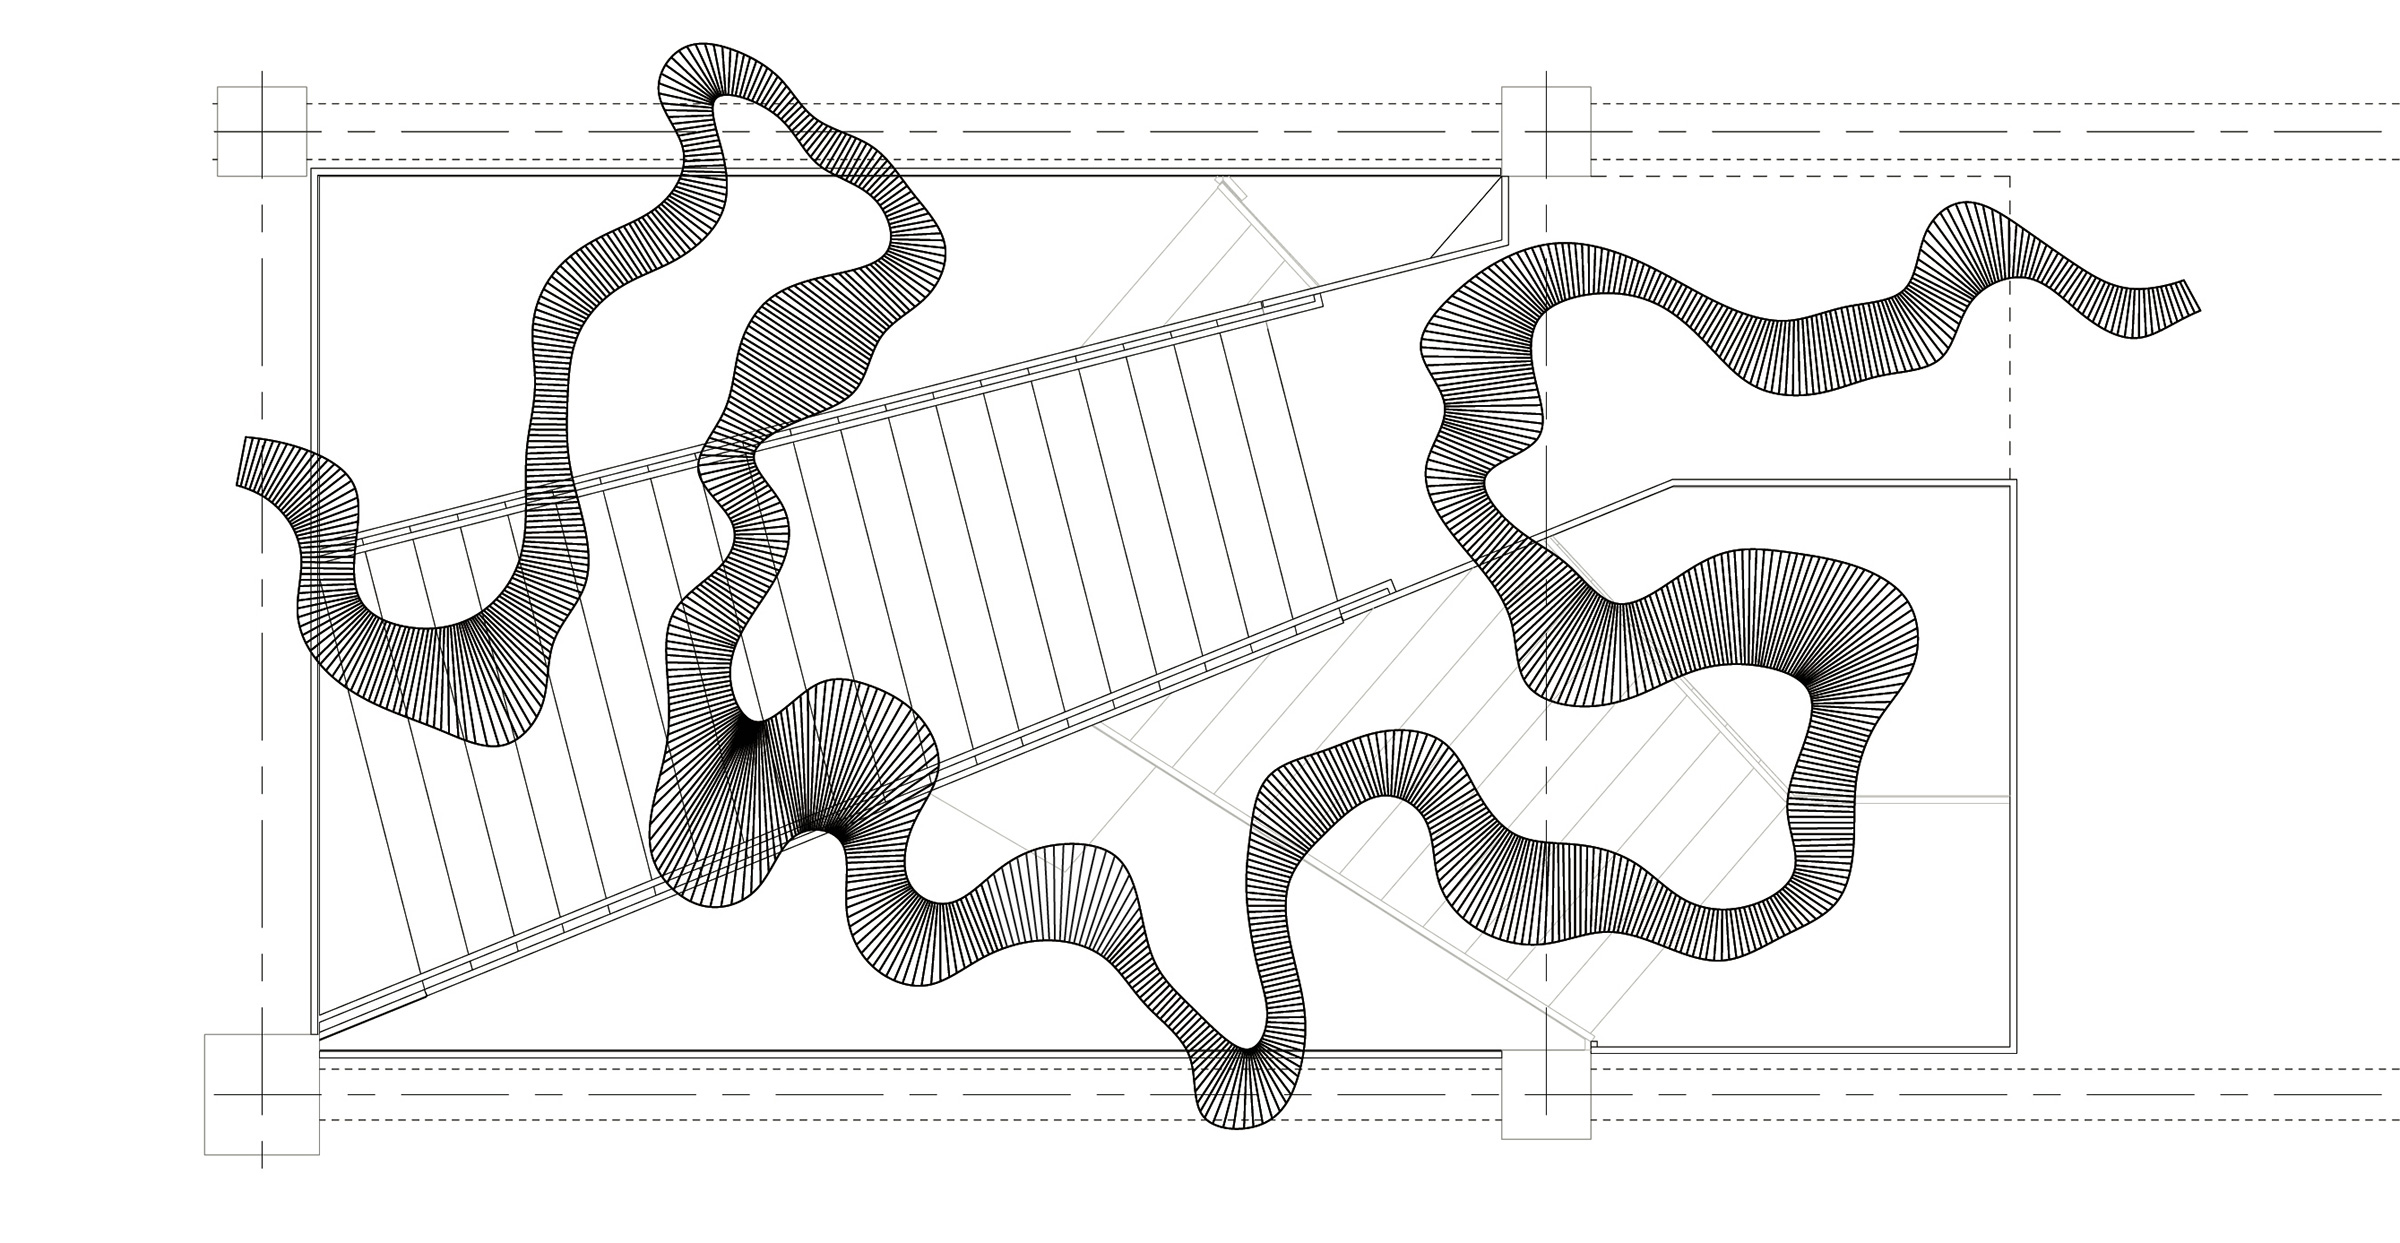 This image is a black-and-white architectural rendering: a plan of the atrium space seen from above, with the artist’s large sculptural installation snaking through the space from left to right.